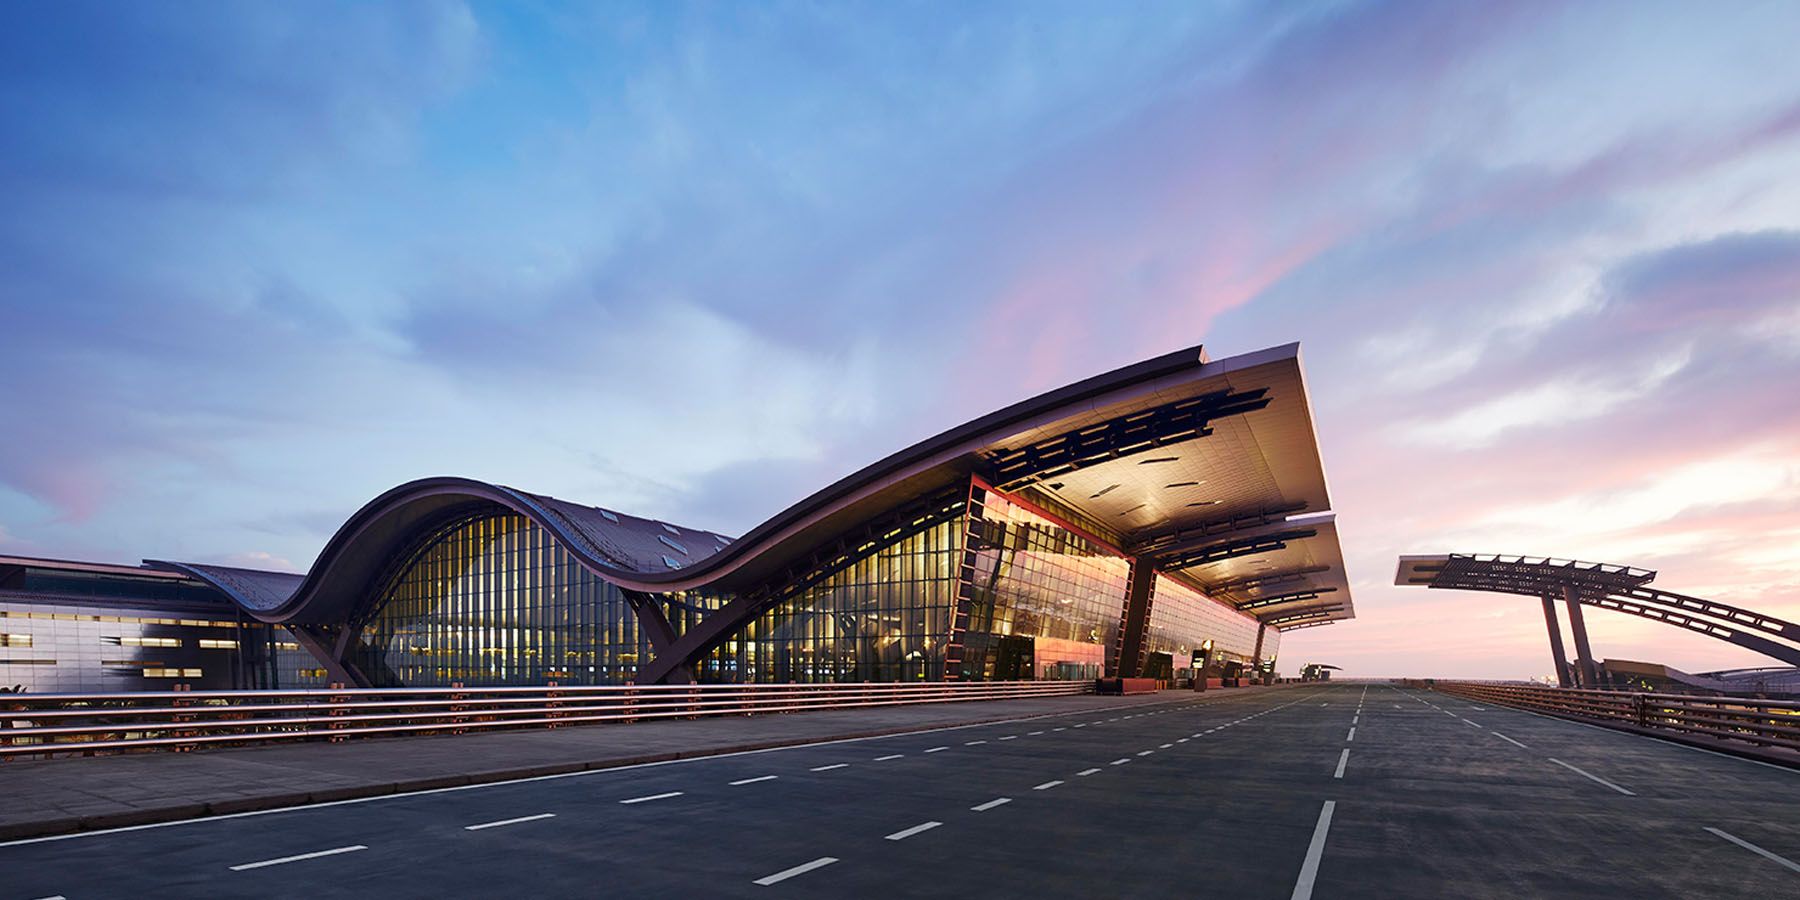 The Hamed International Airport in Qatar, a beautiful airport in real life